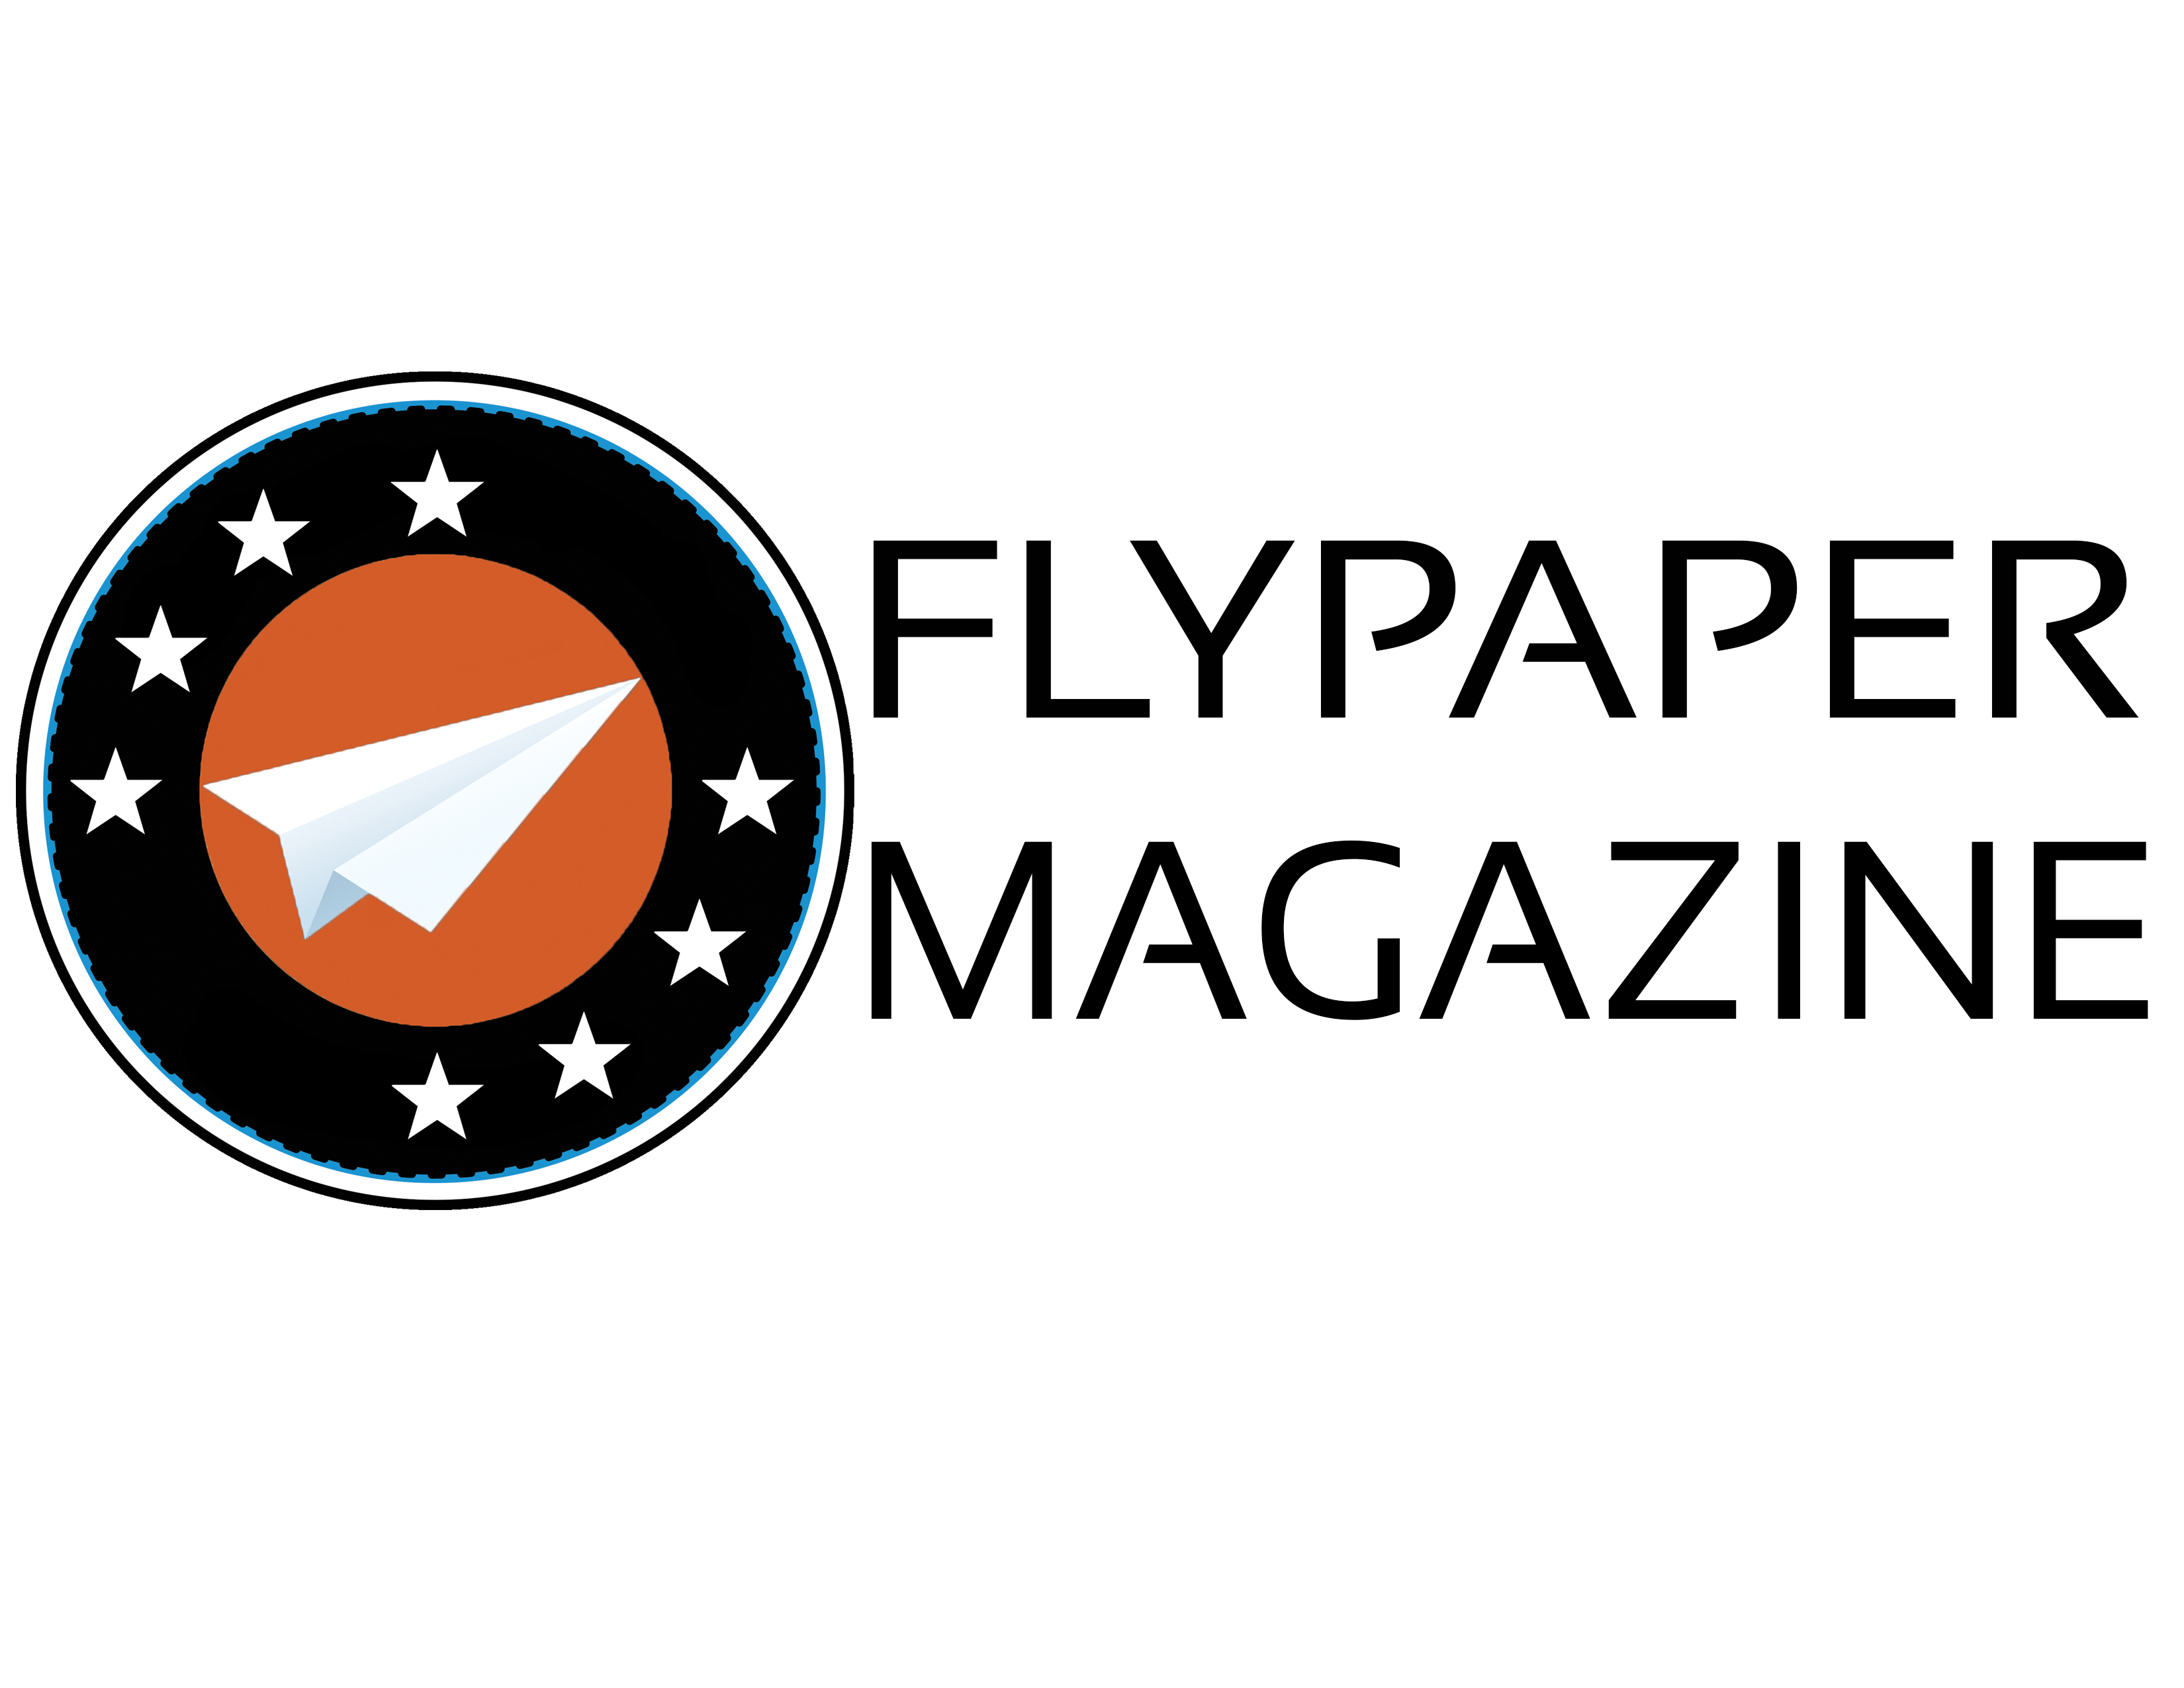 FlyPaper Magazine Issue 2: The 6-1-4